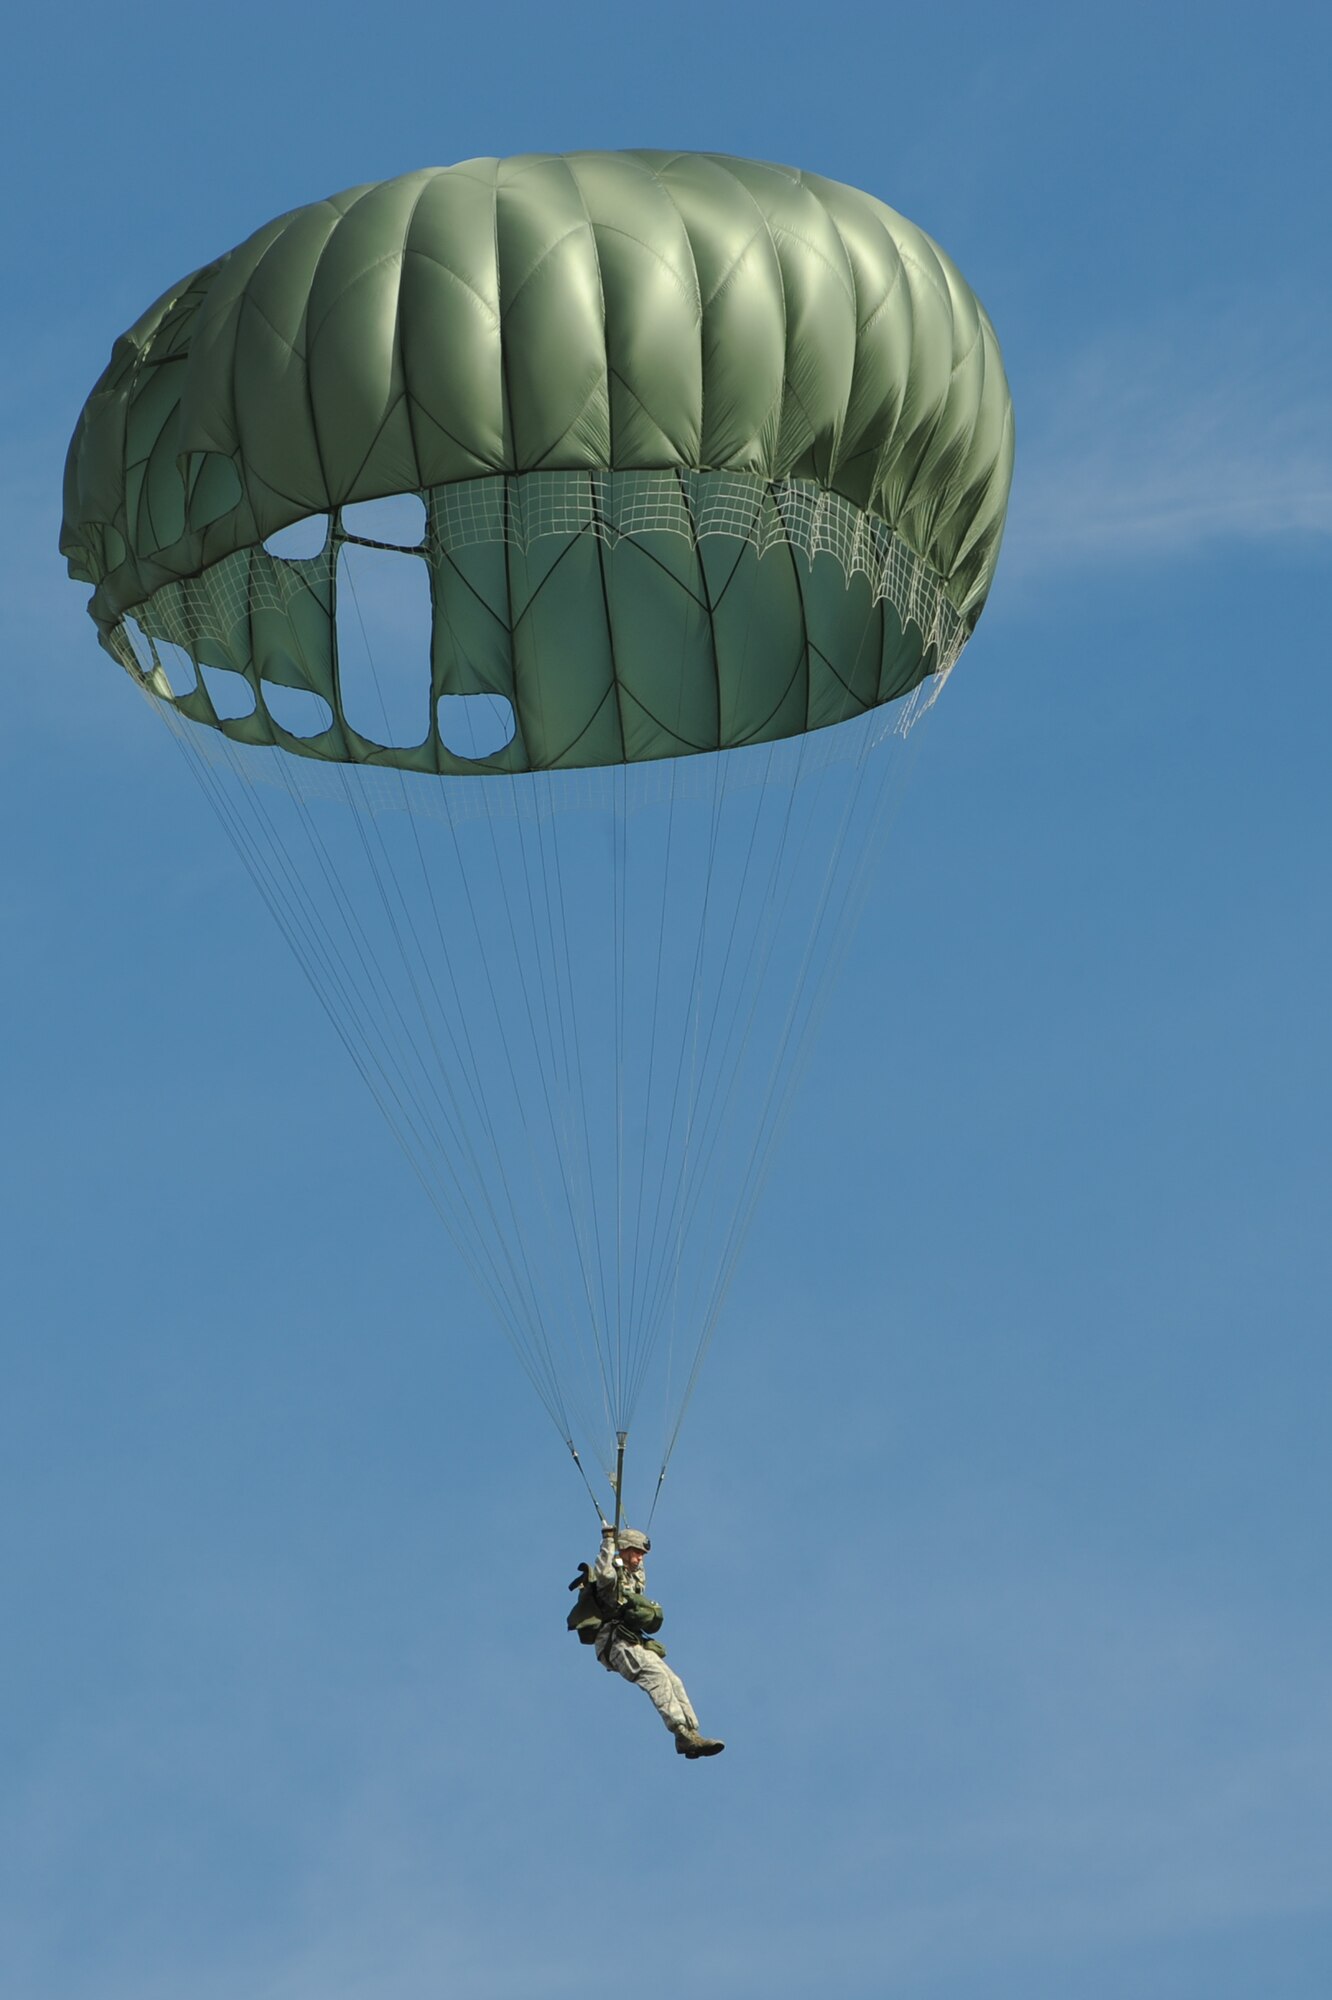 An Airmen from the 820th Base Defense Group, glides to the ground after a static-line jump, Dec. 12, 2015, at Moody Air Force Base, Ga. Members of the 820th BDG deploy worldwide and must maintain qualifications in parachuting by jumping regularly to maintain their readiness. (U.S. Air Force photo by Airman 1st Class Kathleen D. Bryant/Released)
